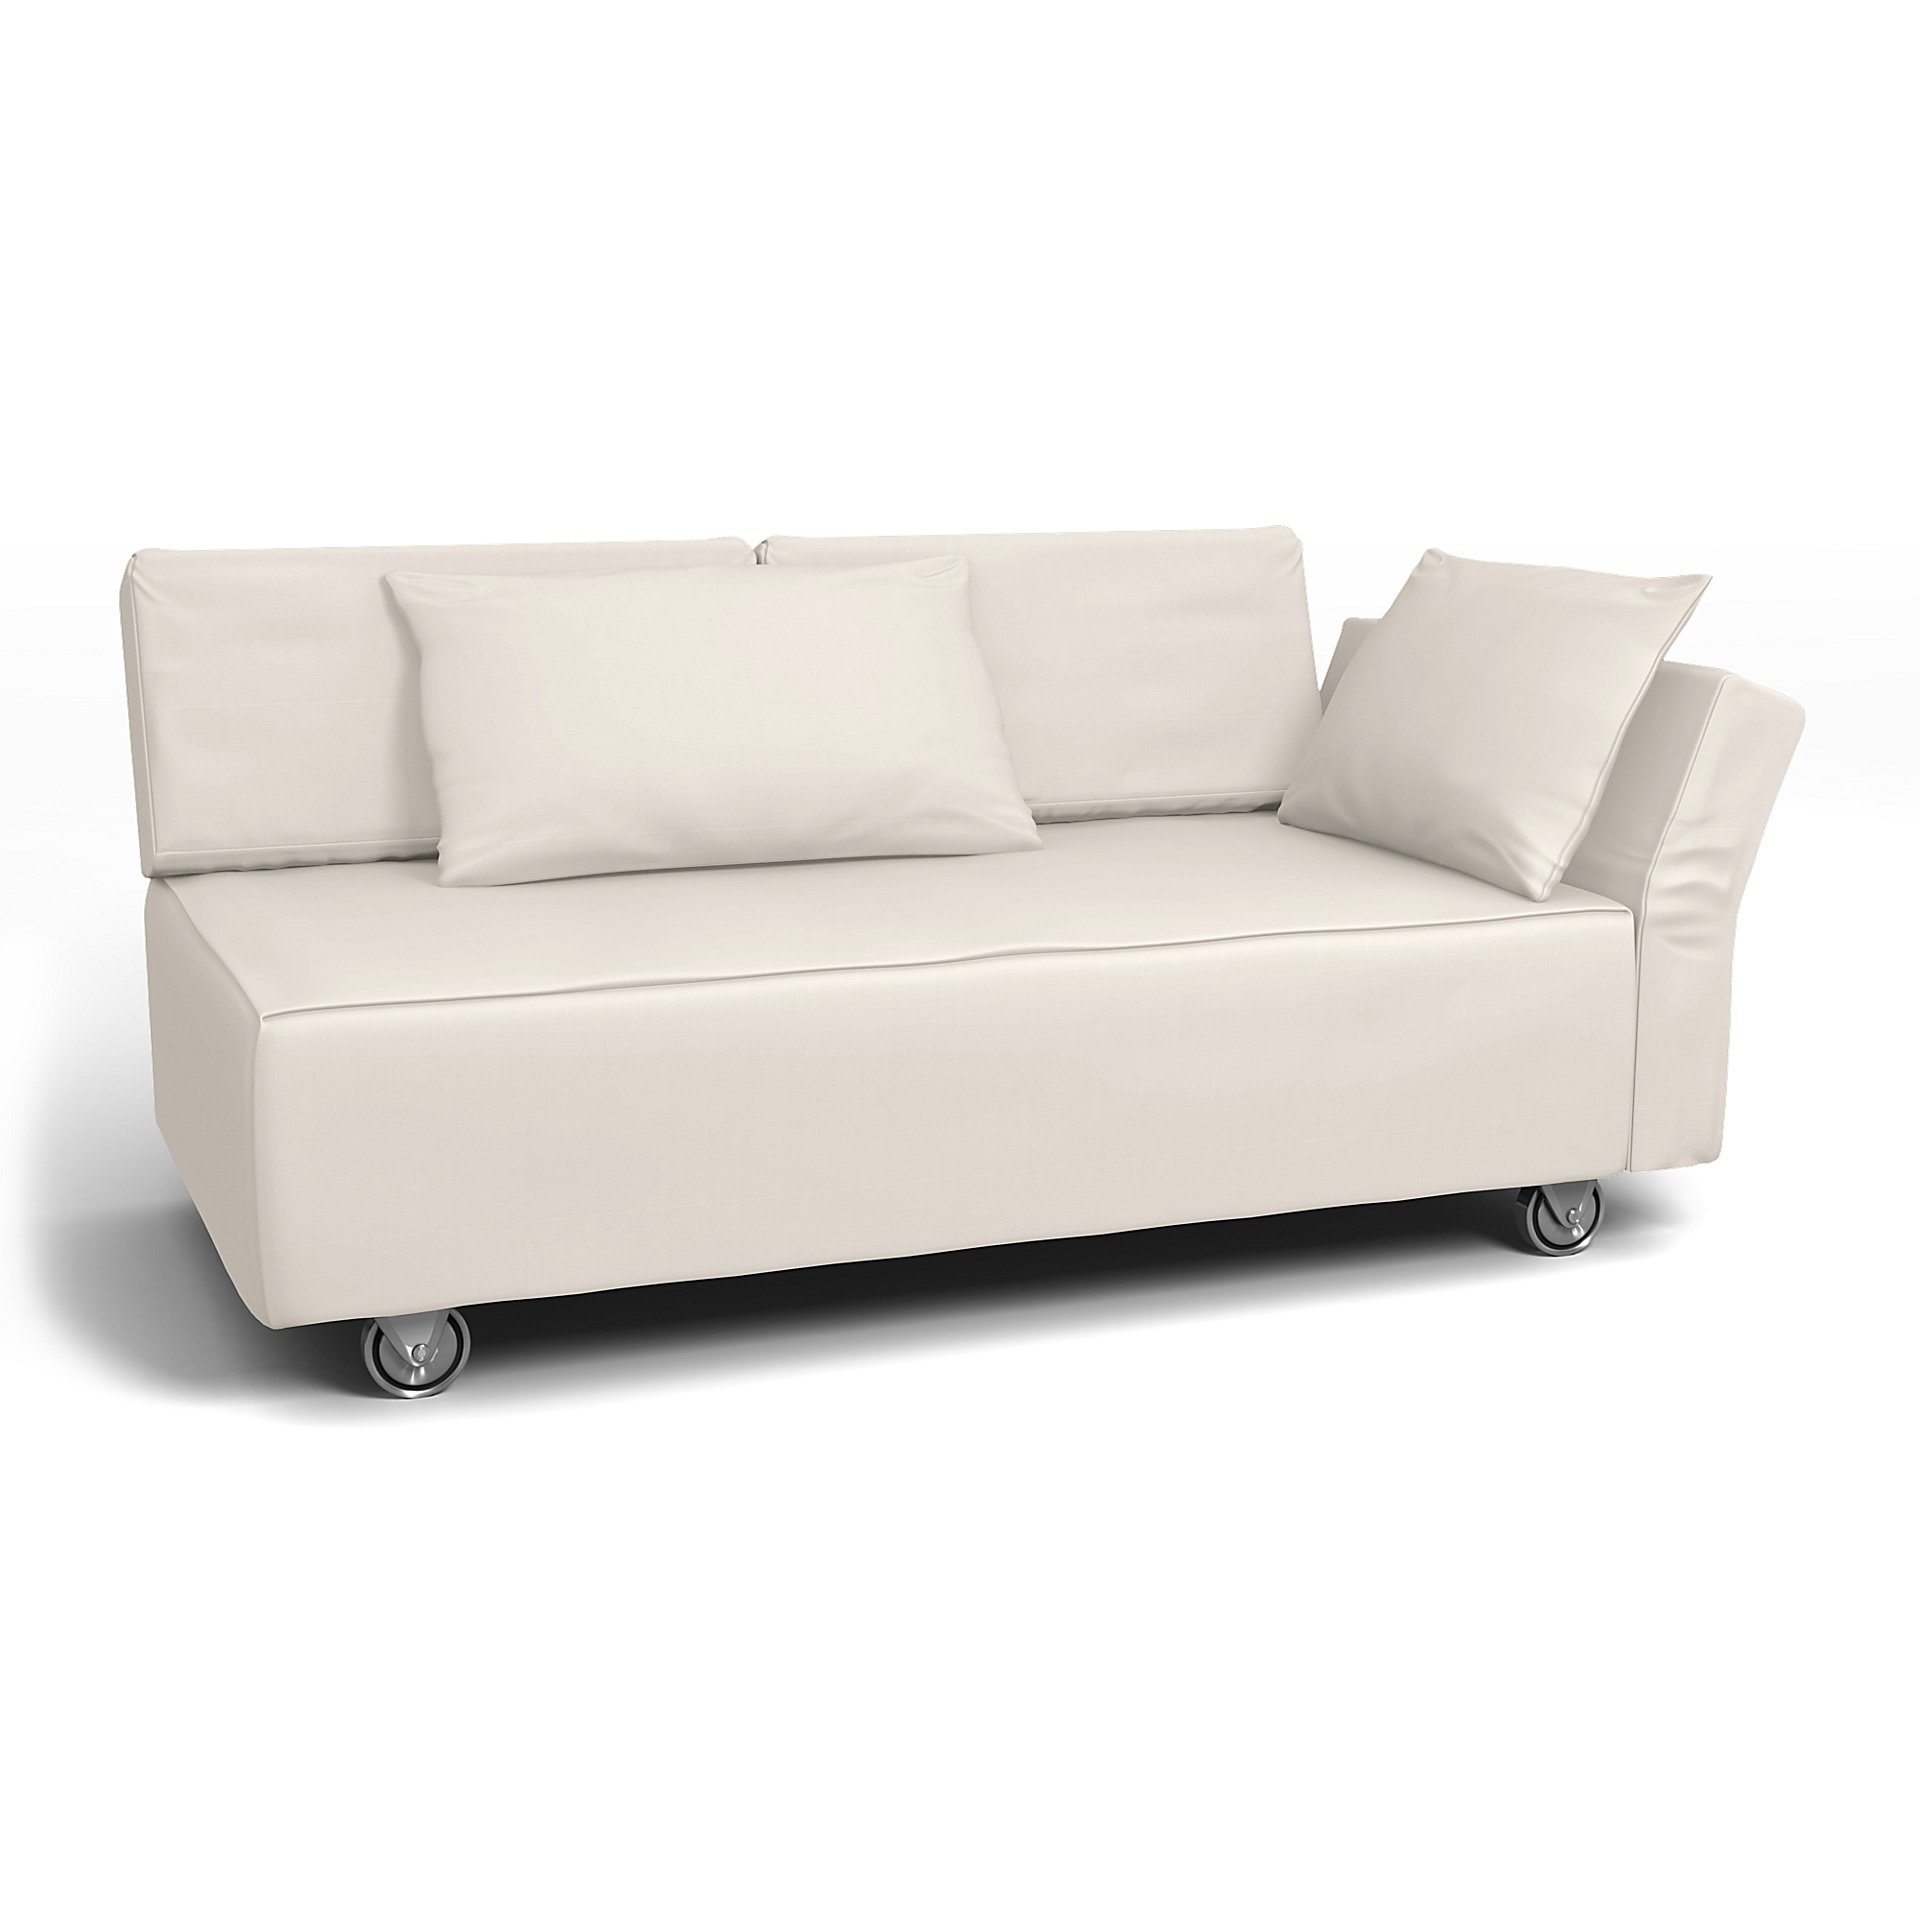 IKEA - Falsterbo 2 Seat Sofa with Right Arm Cover, Soft White, Cotton - Bemz